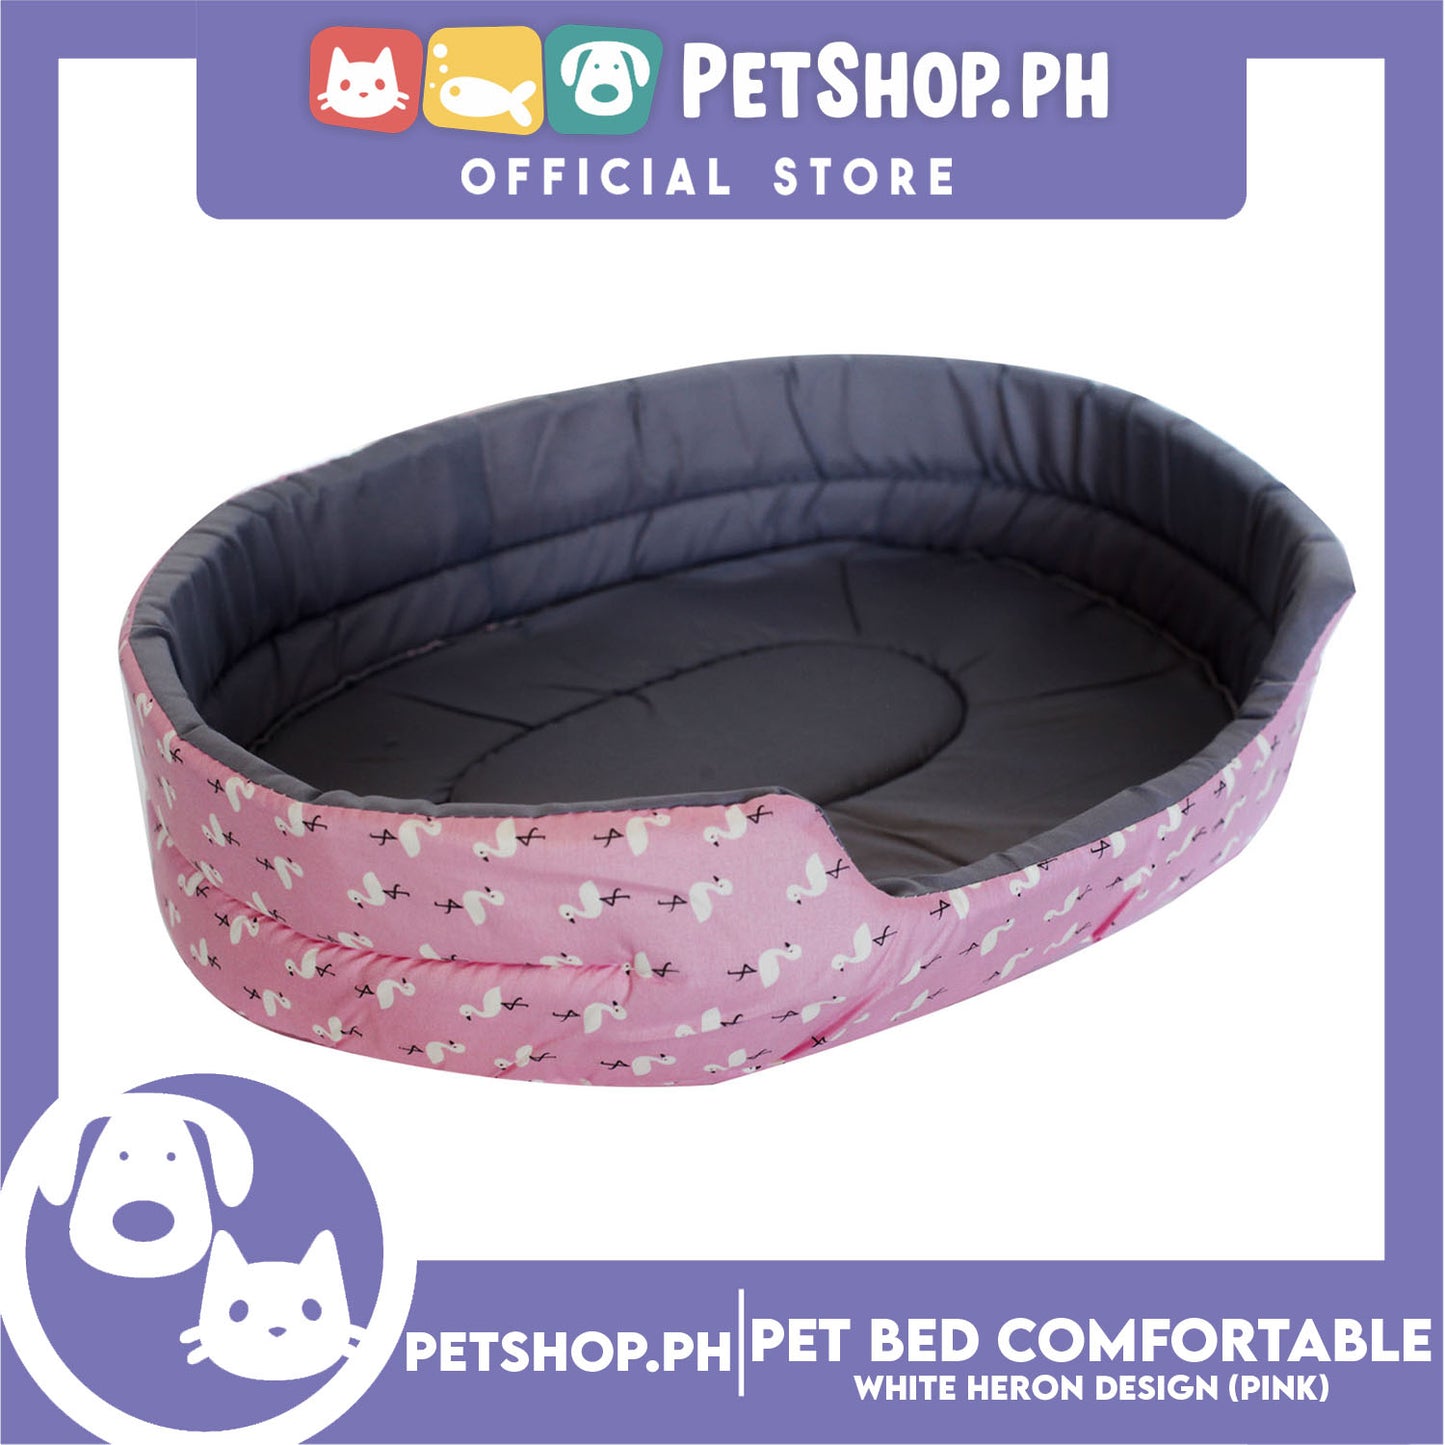 Pet Bed Comfortable Sleeping Bed with White Heron Design (Pink) for Dogs & Cats